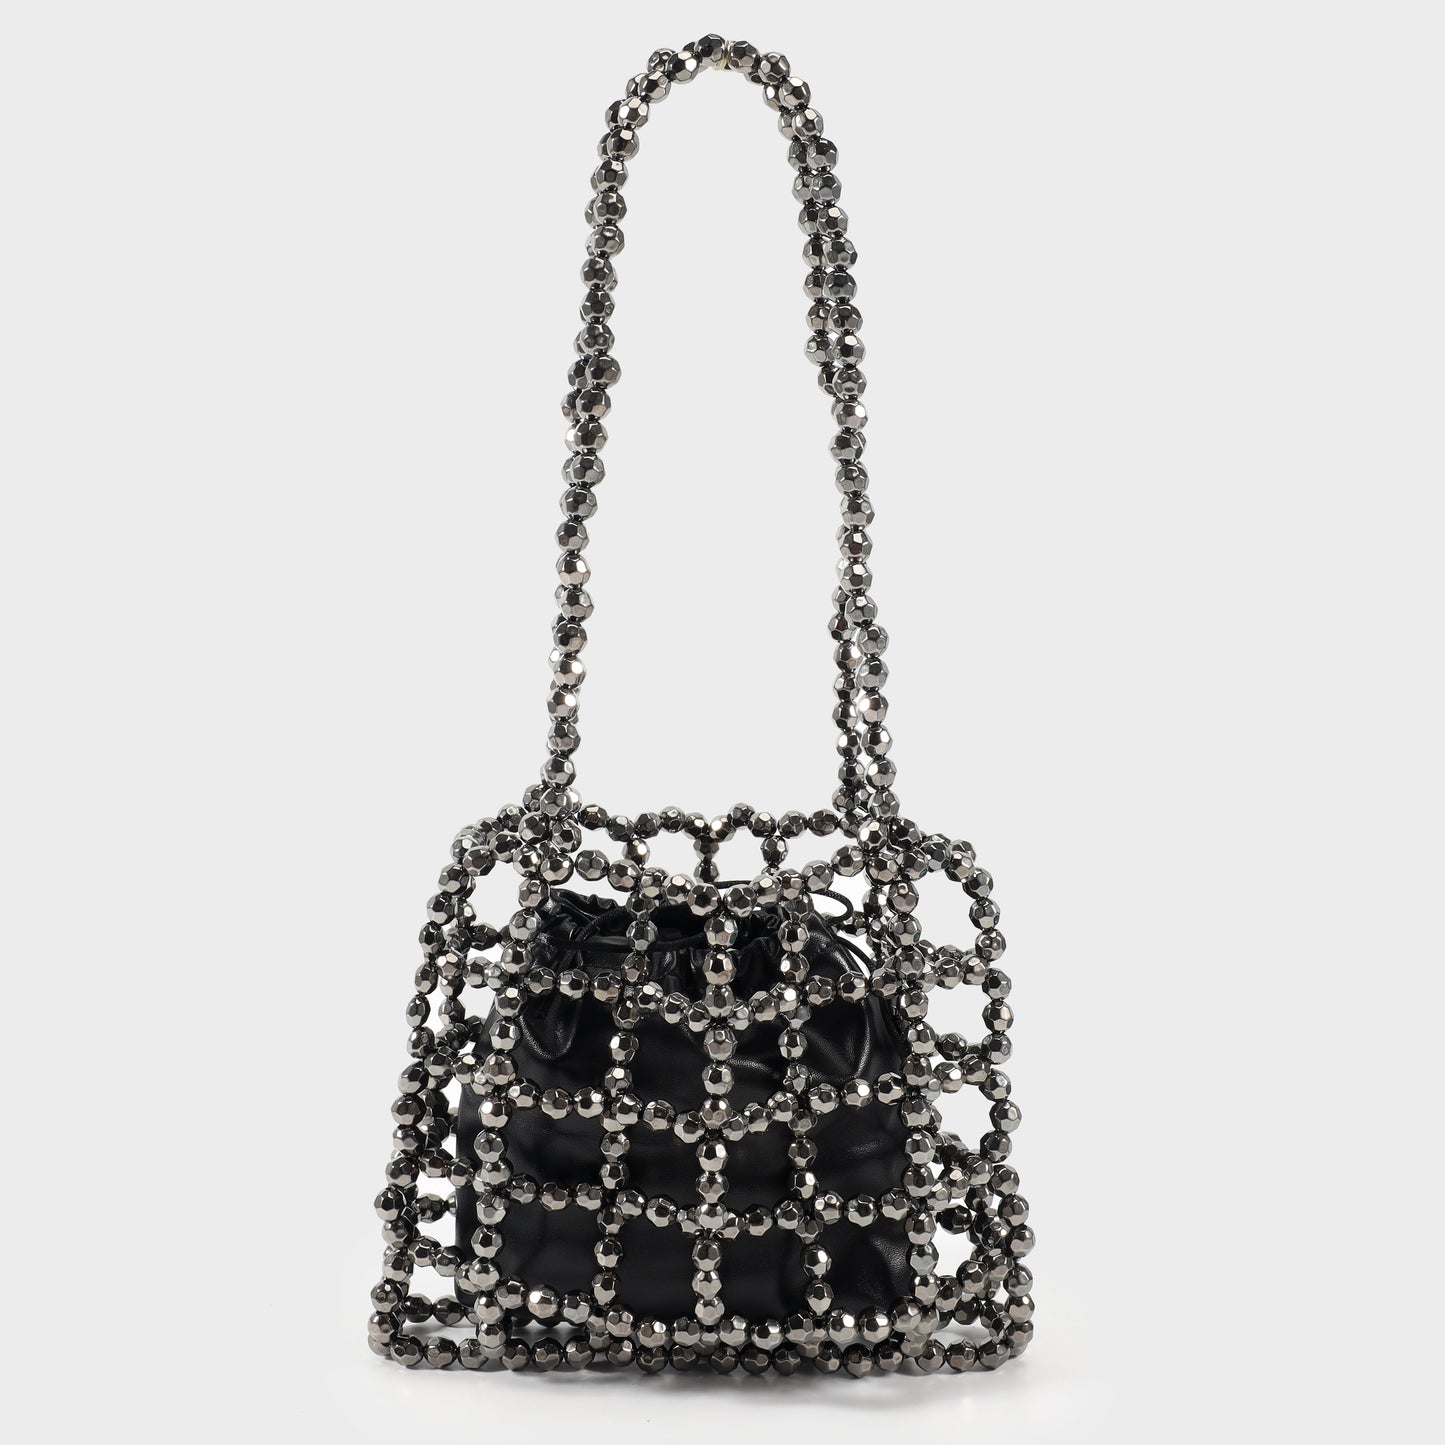 Shoulder bag with beads and internal fabric - GRAPHITE